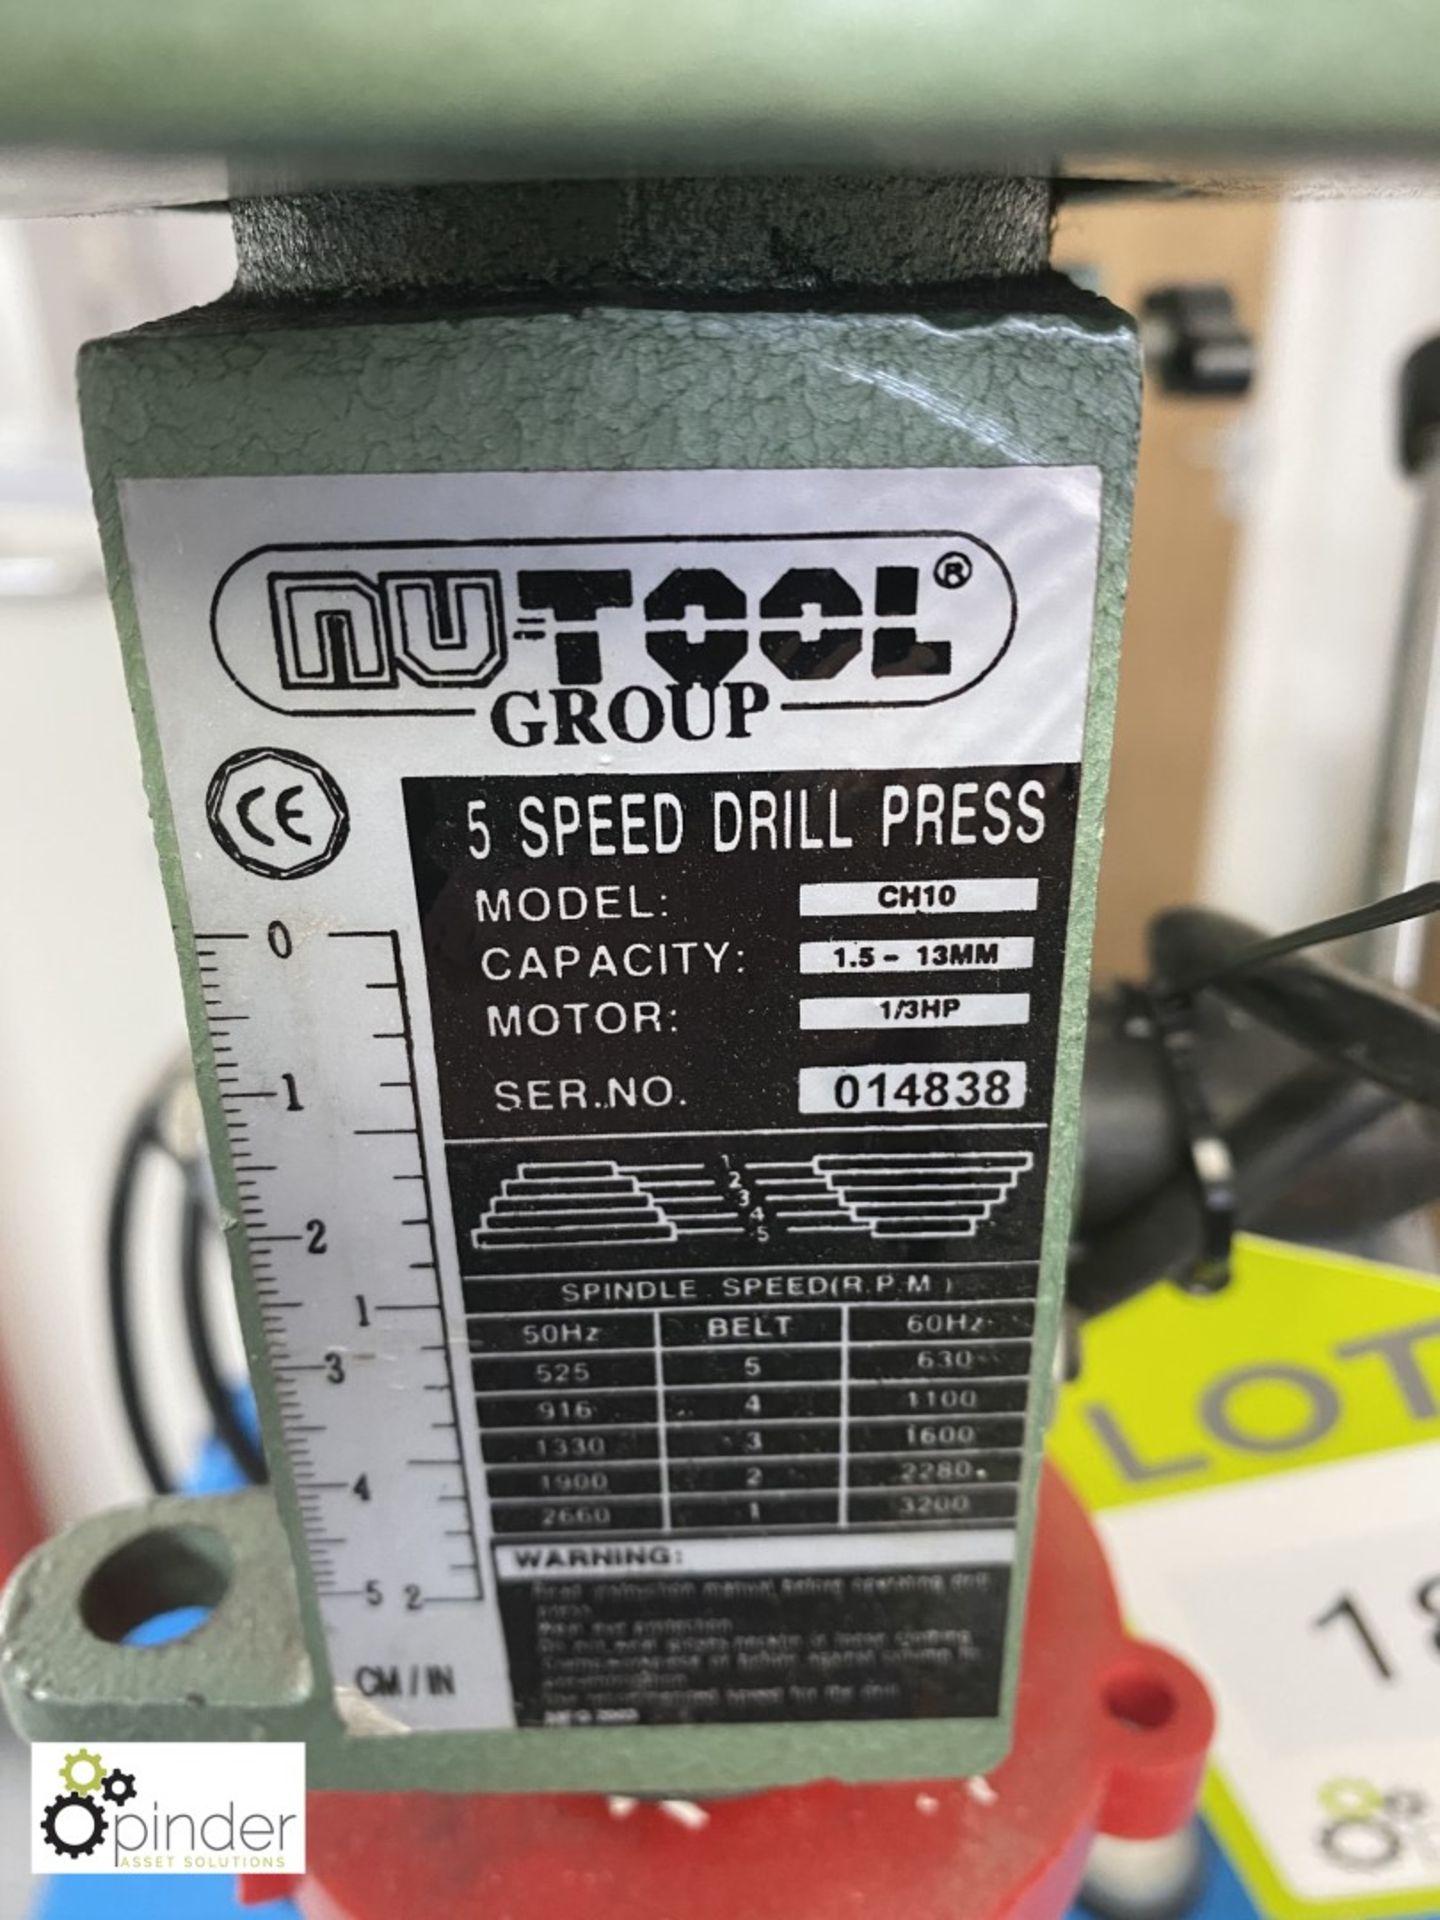 Nu-Tool 5-speed Drill Press, 240volts - Image 3 of 3